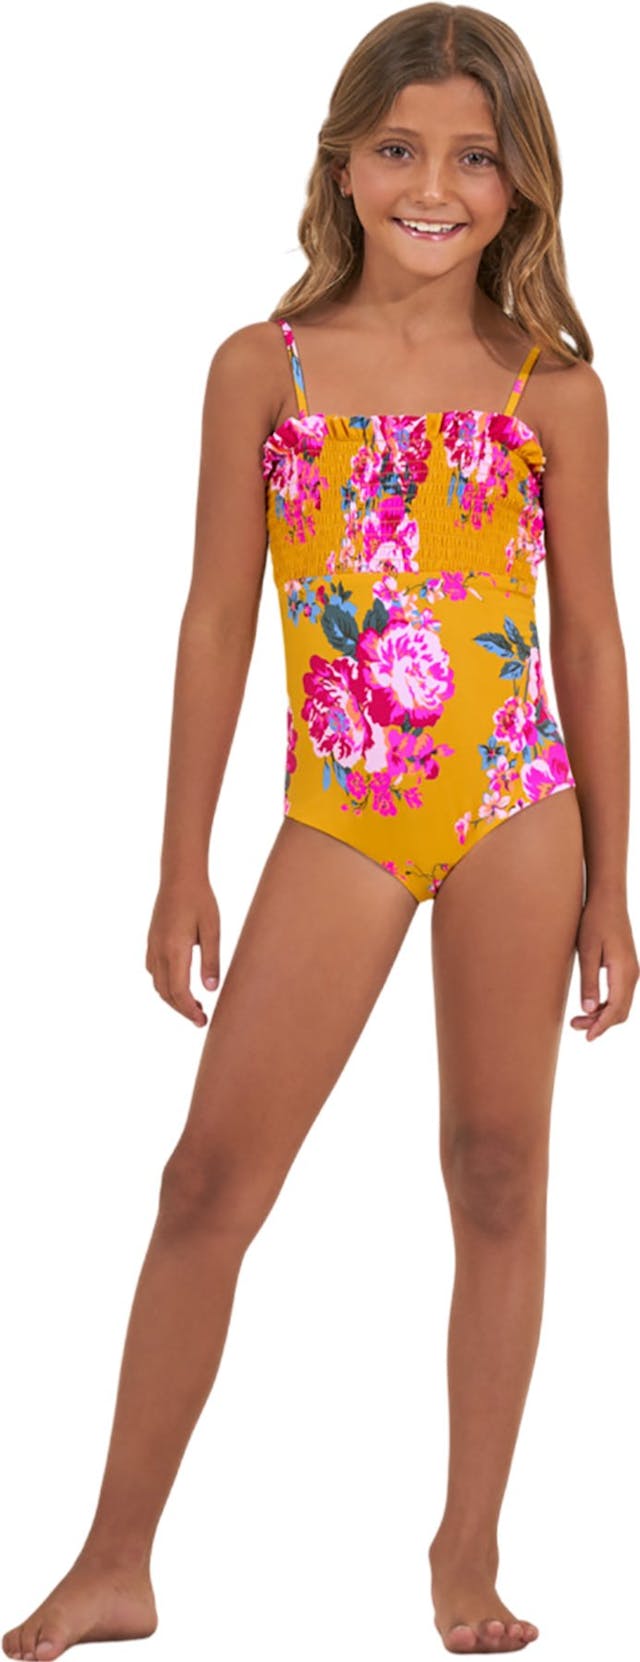 Product image for Becharm Bouquet One Piece Swimsuit - Girls 